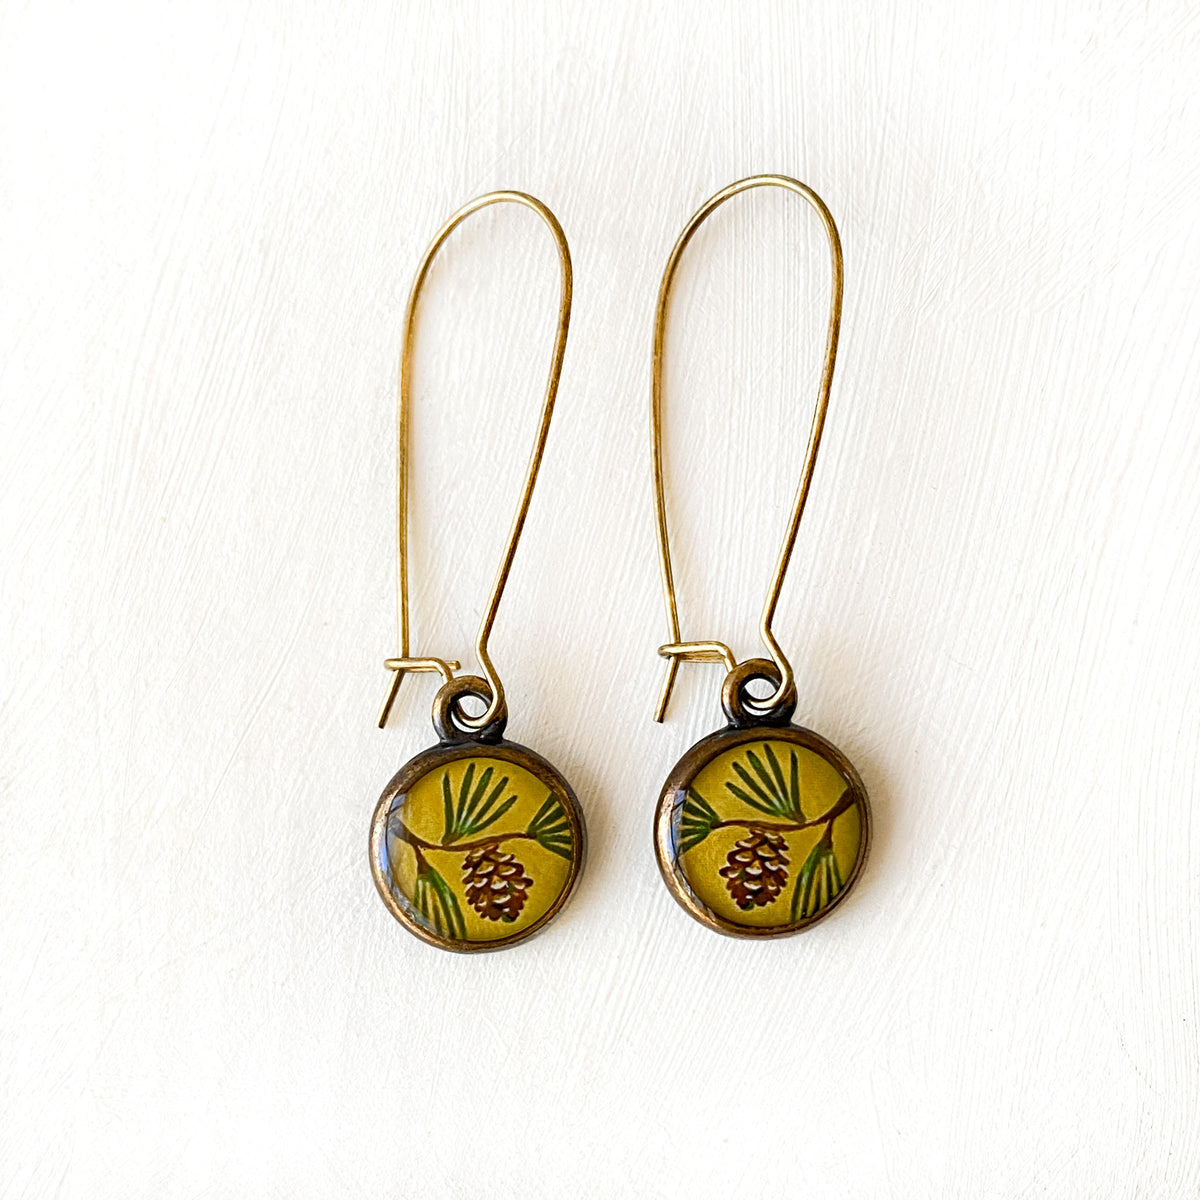 a pair of earrings with a flower design on them